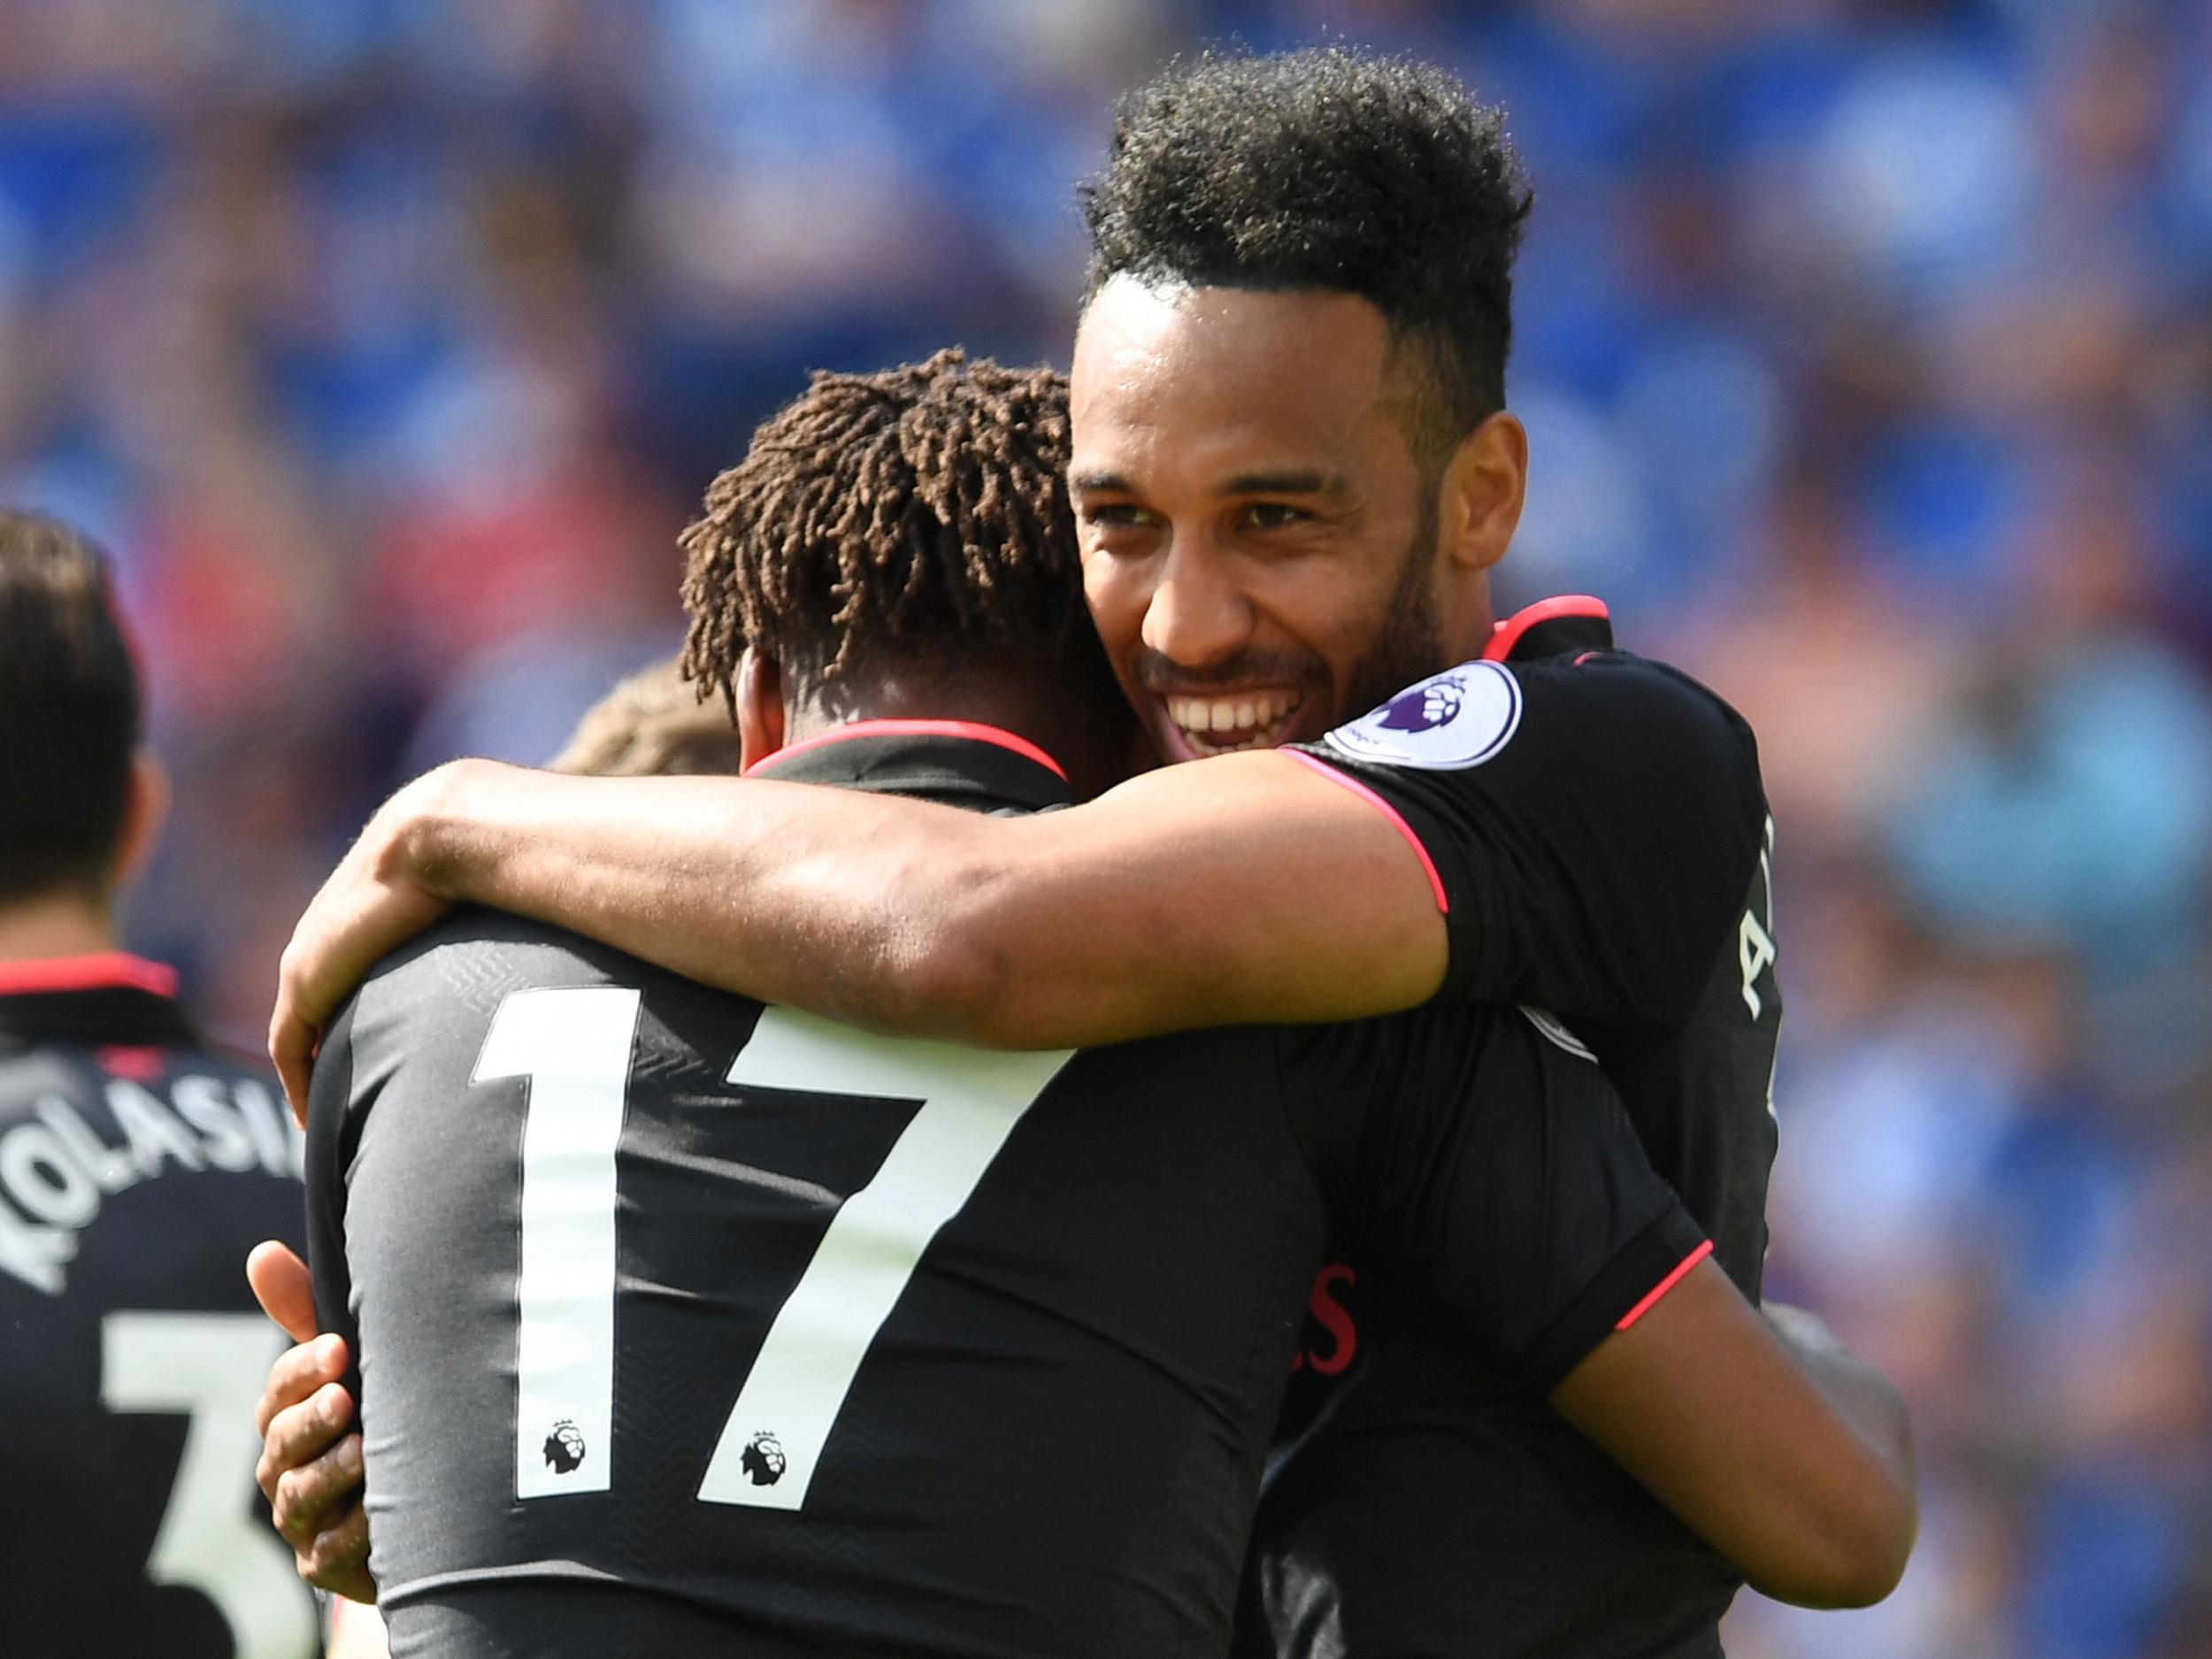 Pierre-Emerick Aubameyang became the fastest Arsenal player to score 10 goals on Sunday